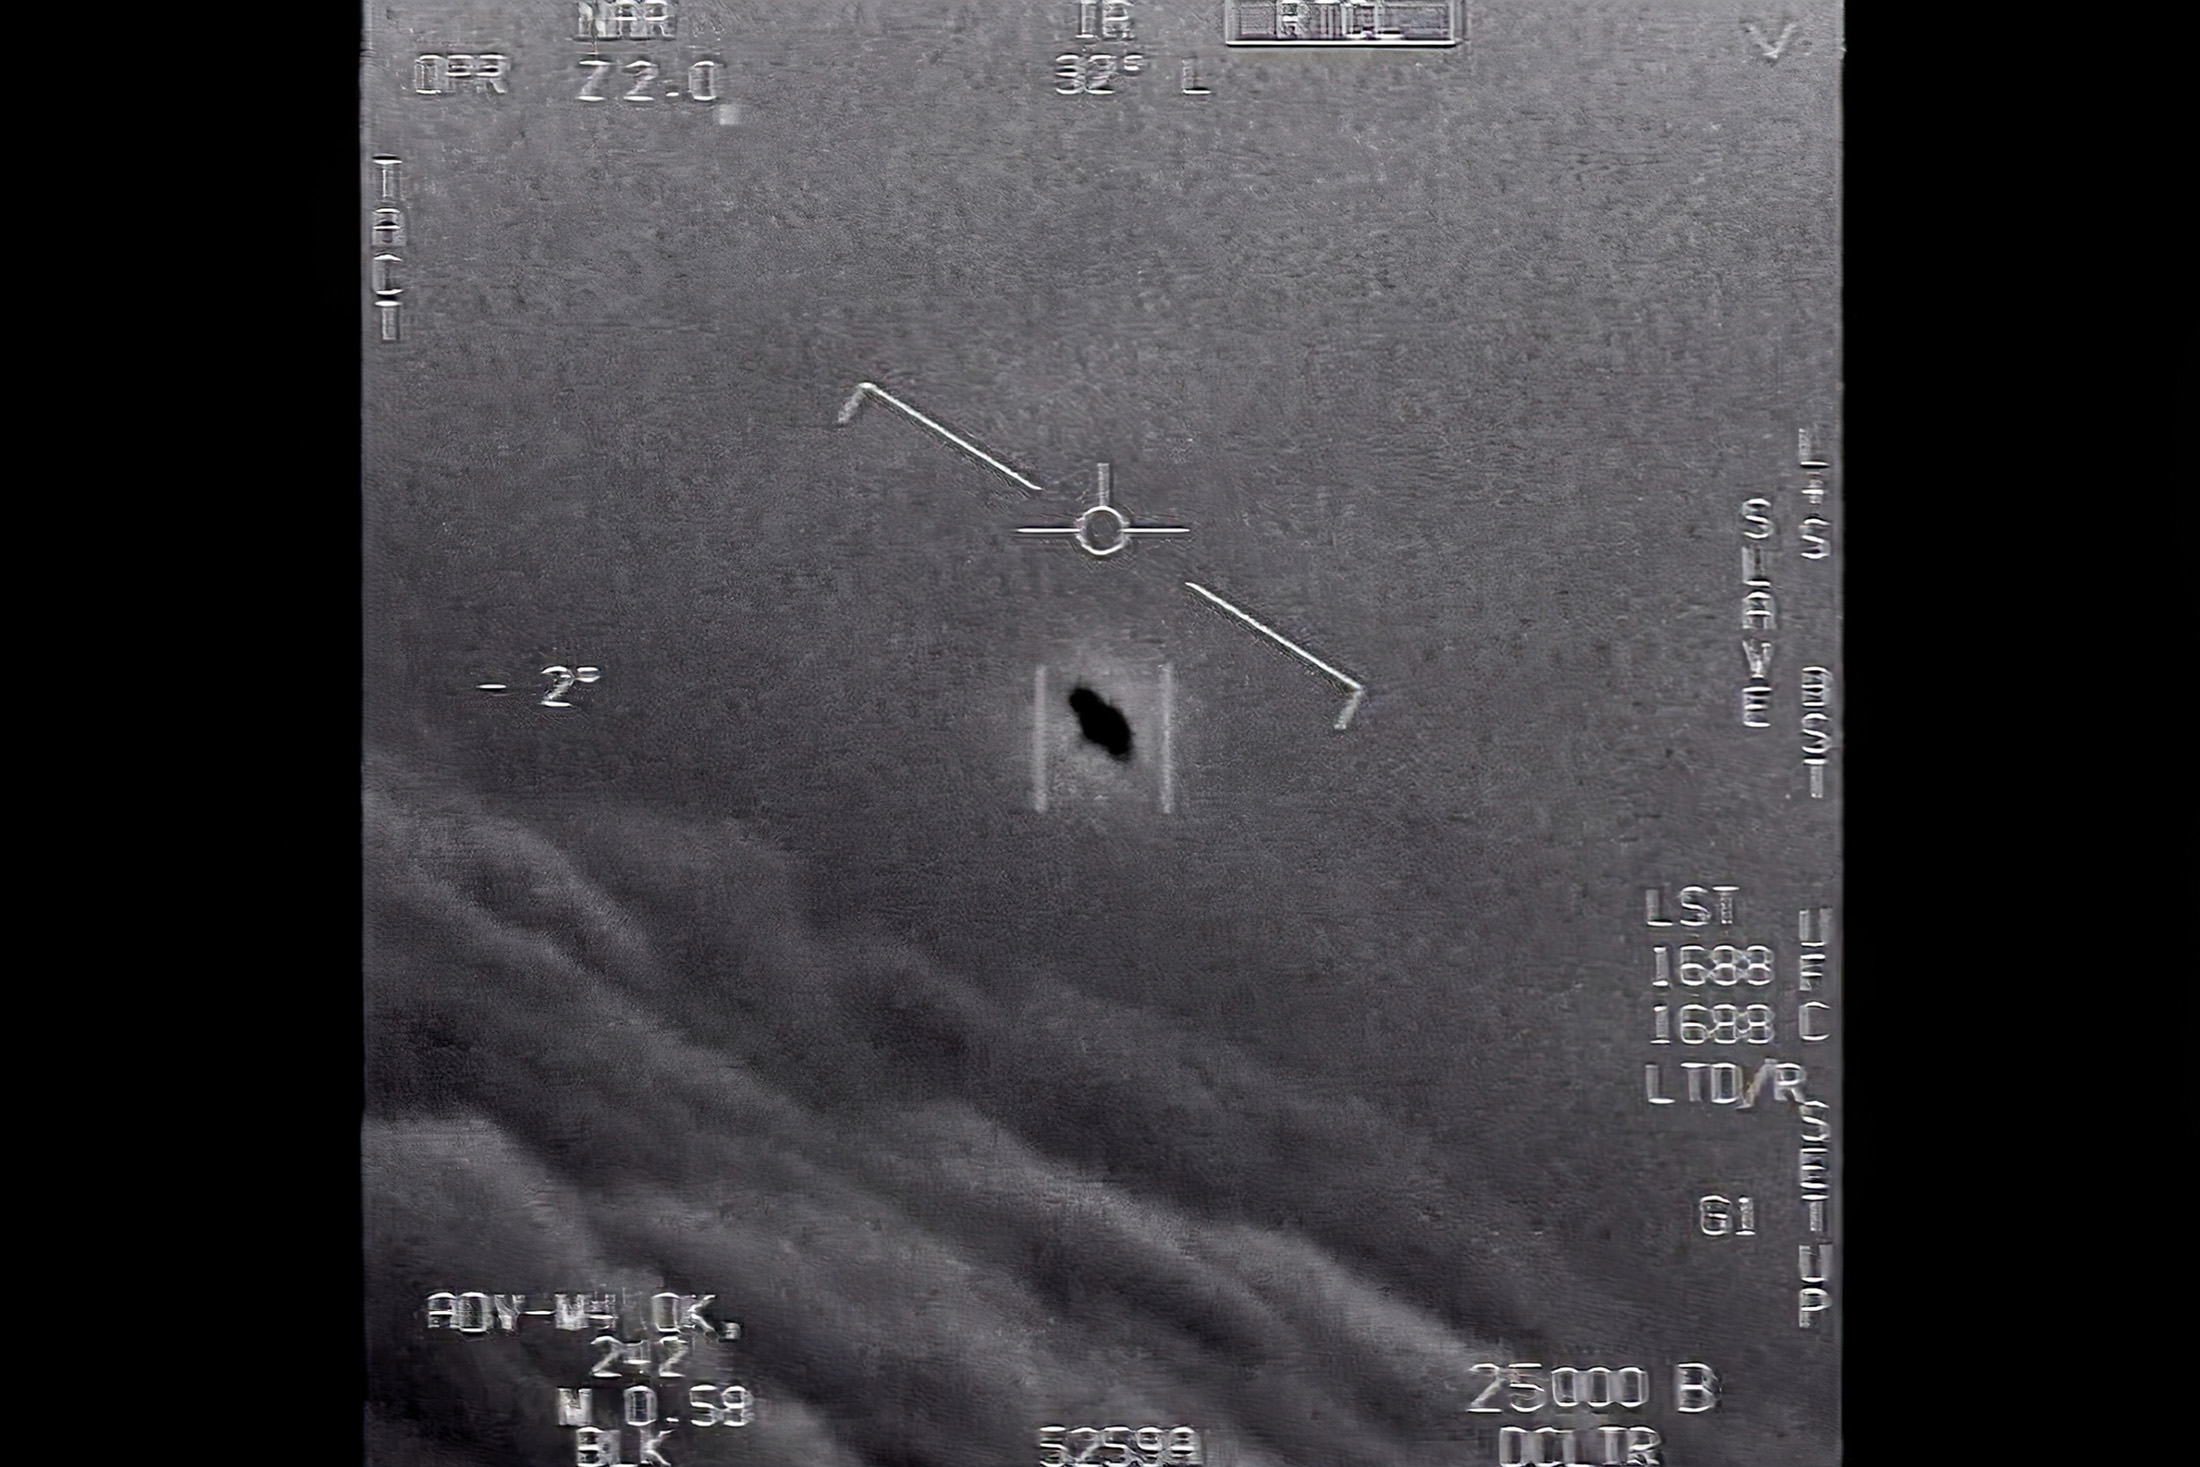 An unidentified flying object&nbsp;is tracked on a Navy pilot’s&nbsp;heads-up display in 2015.&nbsp;